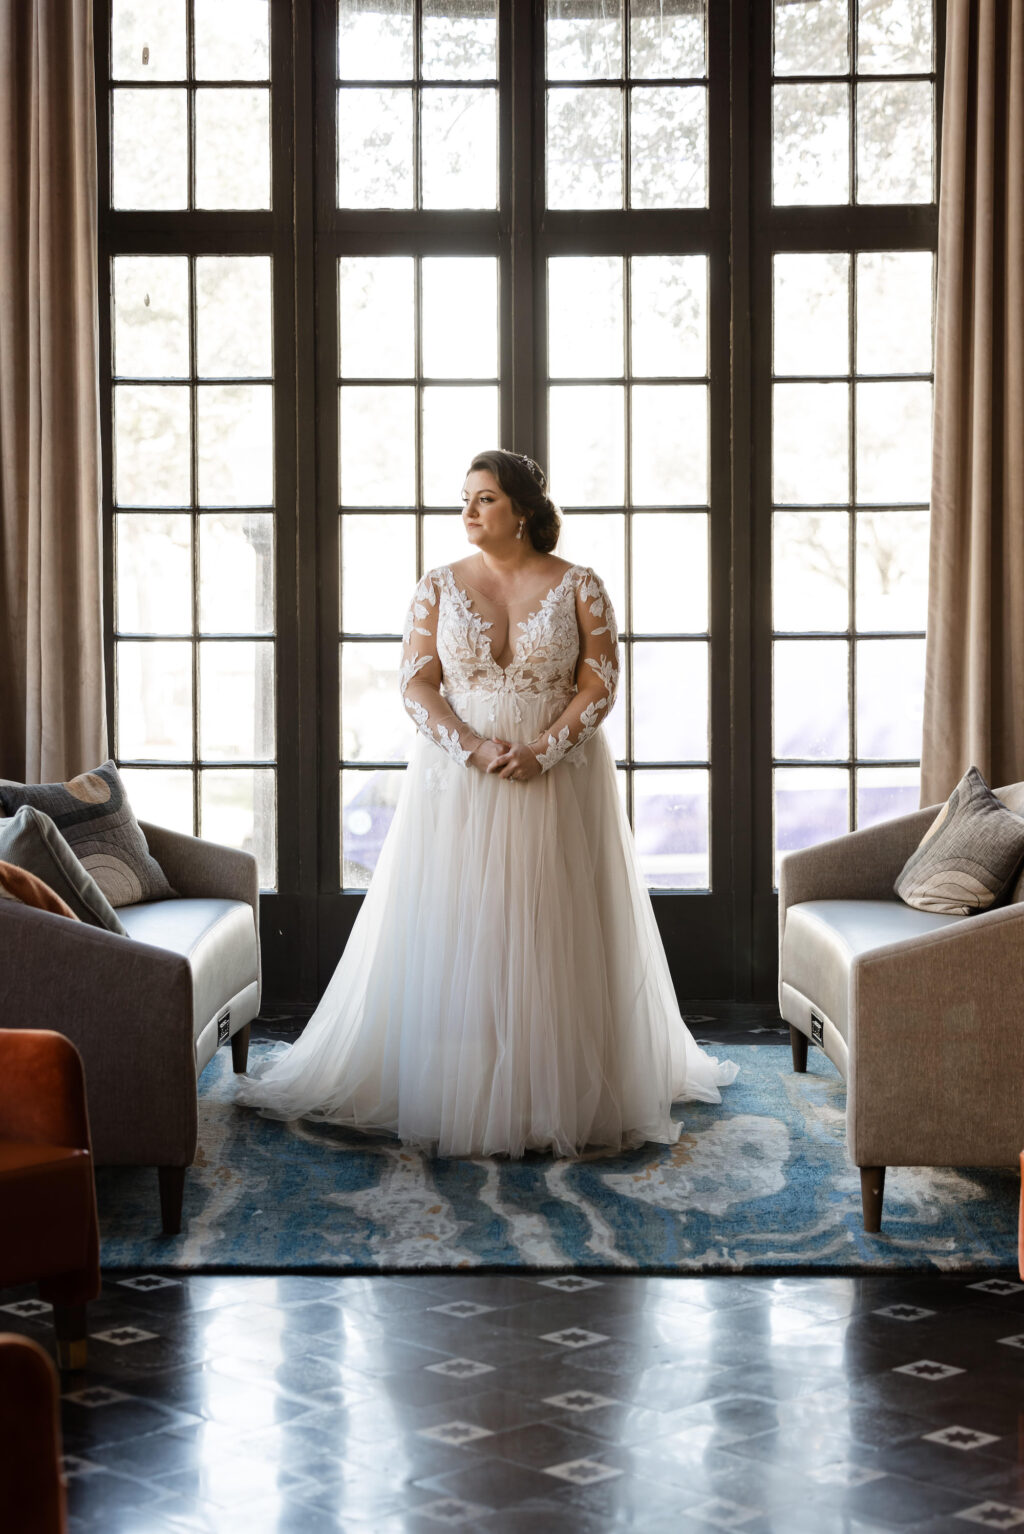 Bride Getting Ready | Lace and Tulle, White and Nude Long Sleeve Illusion A-Line Deep V-neckline Wedding Dress Inspiration | Lakeland Photographer Garry and Stacy Photography